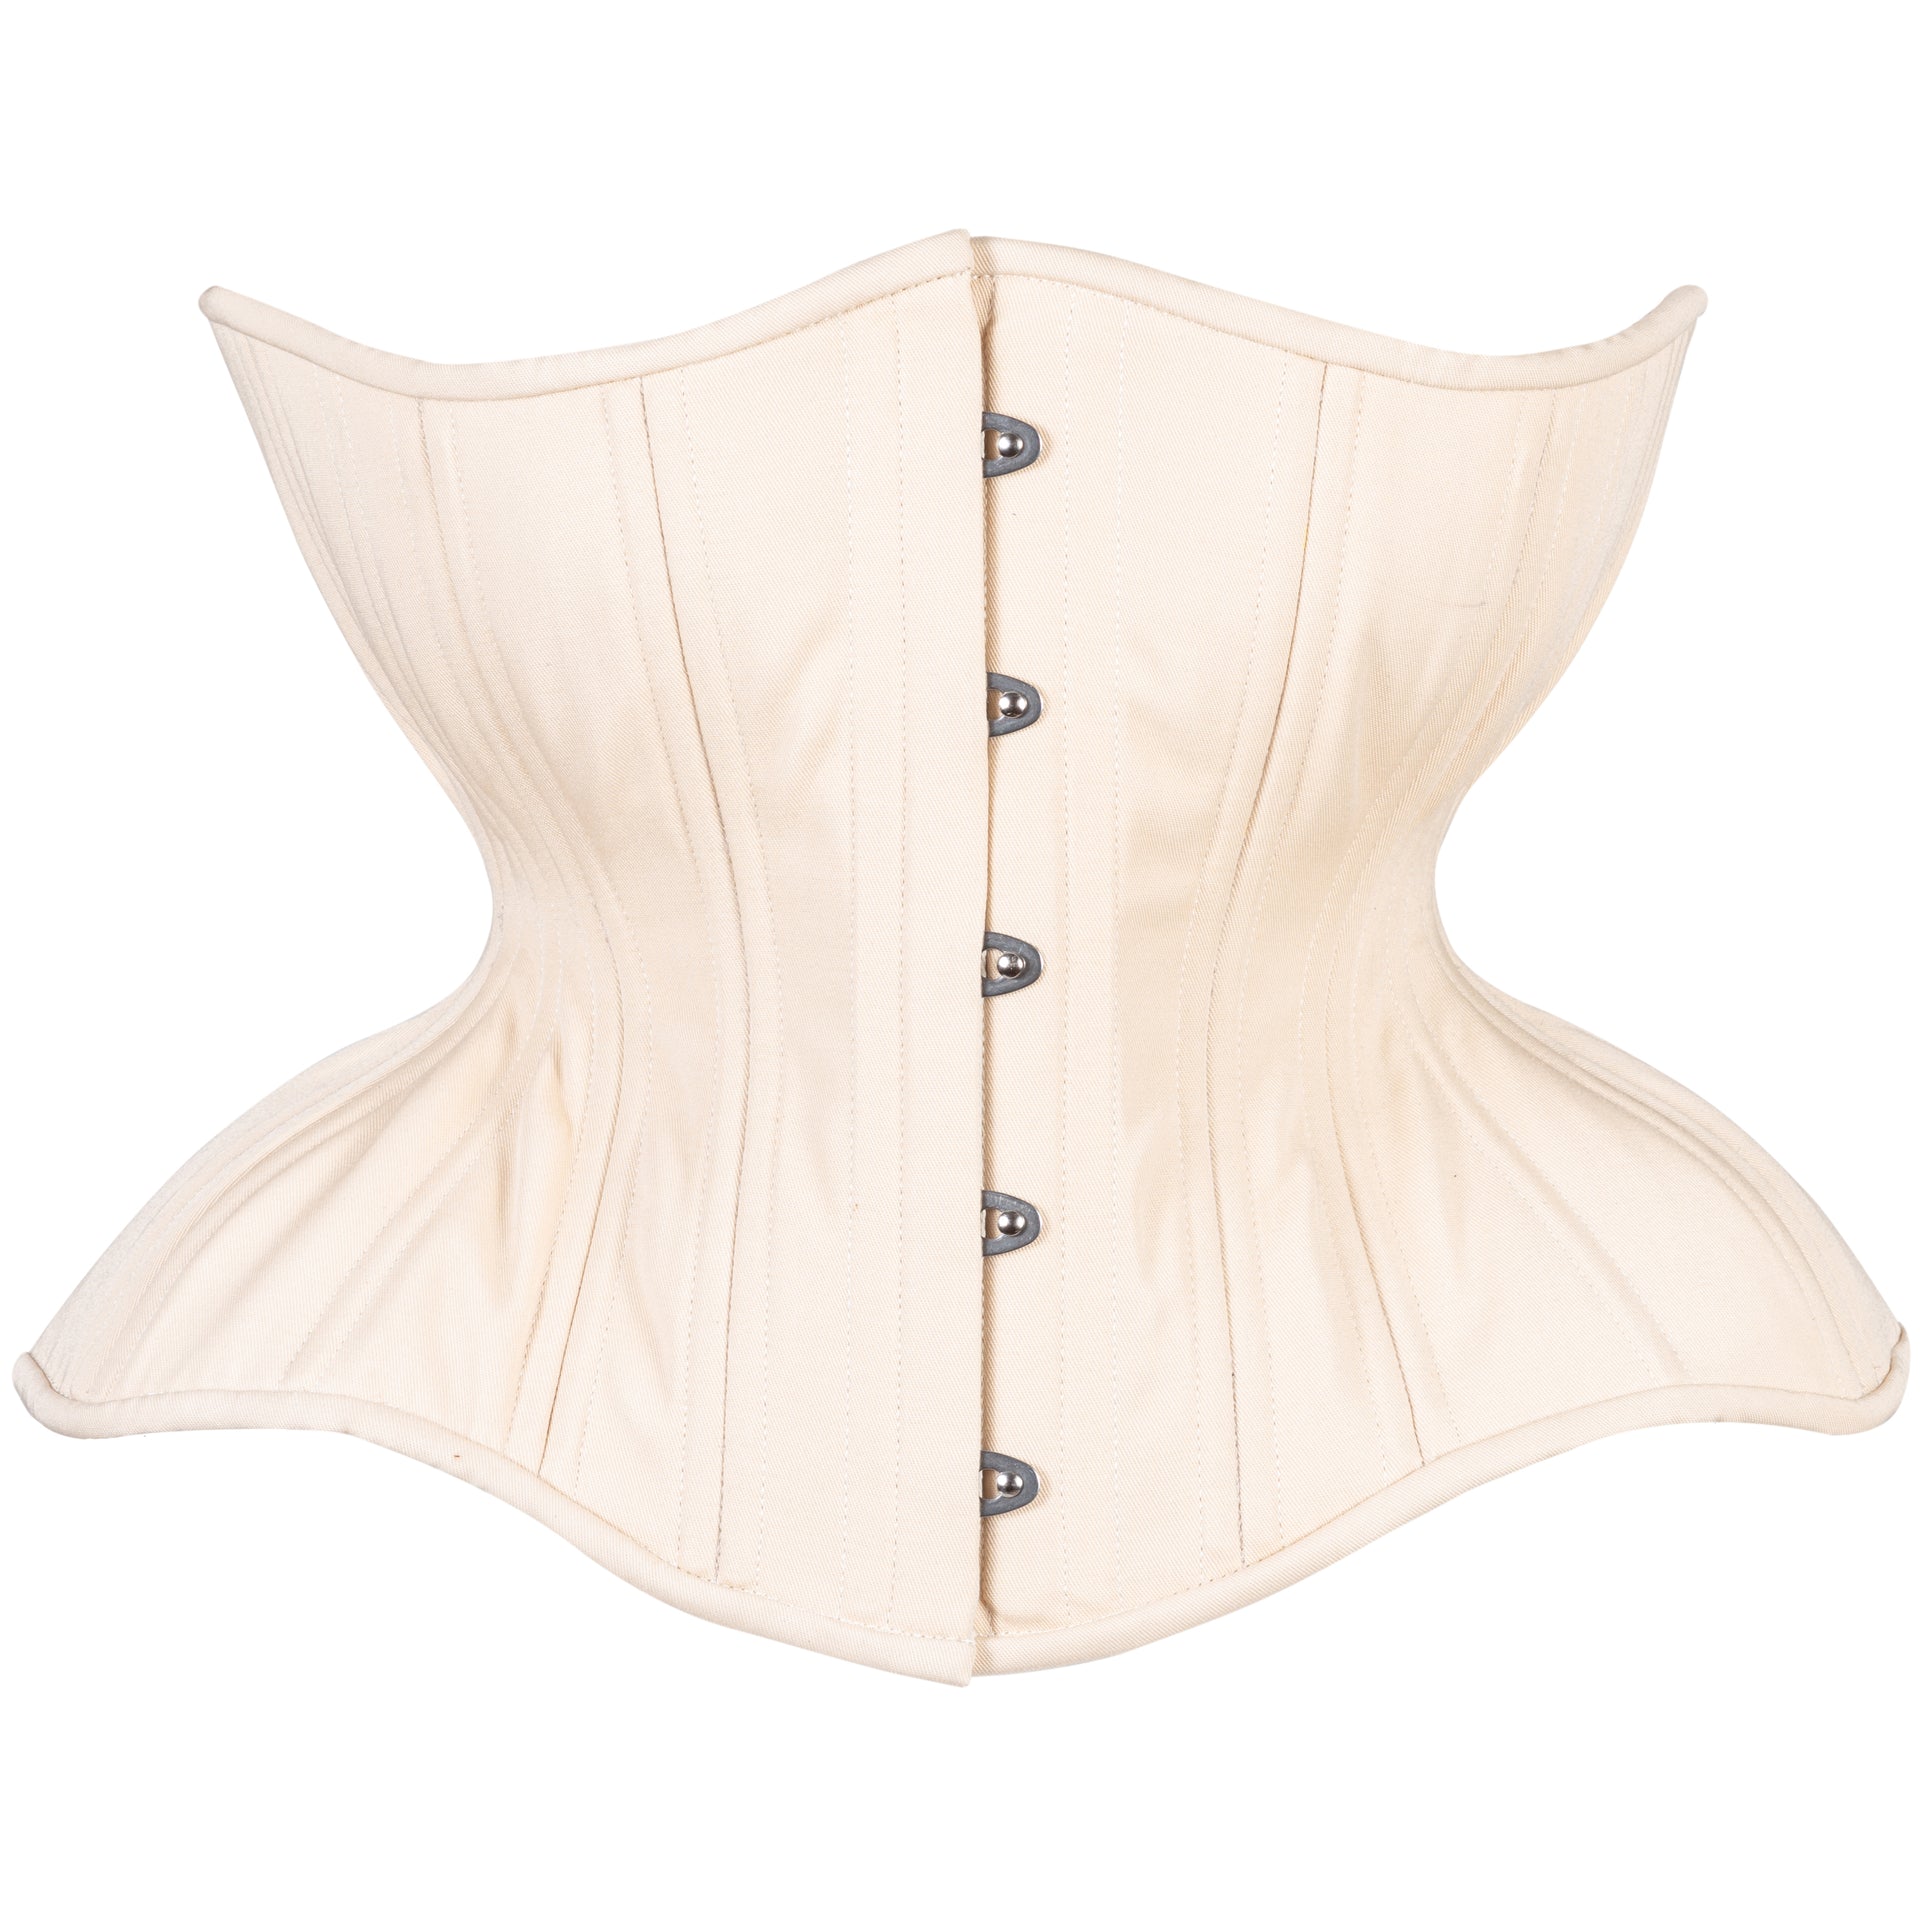 LilLy - a cupped corset pattern with under-bust option size UK8-22